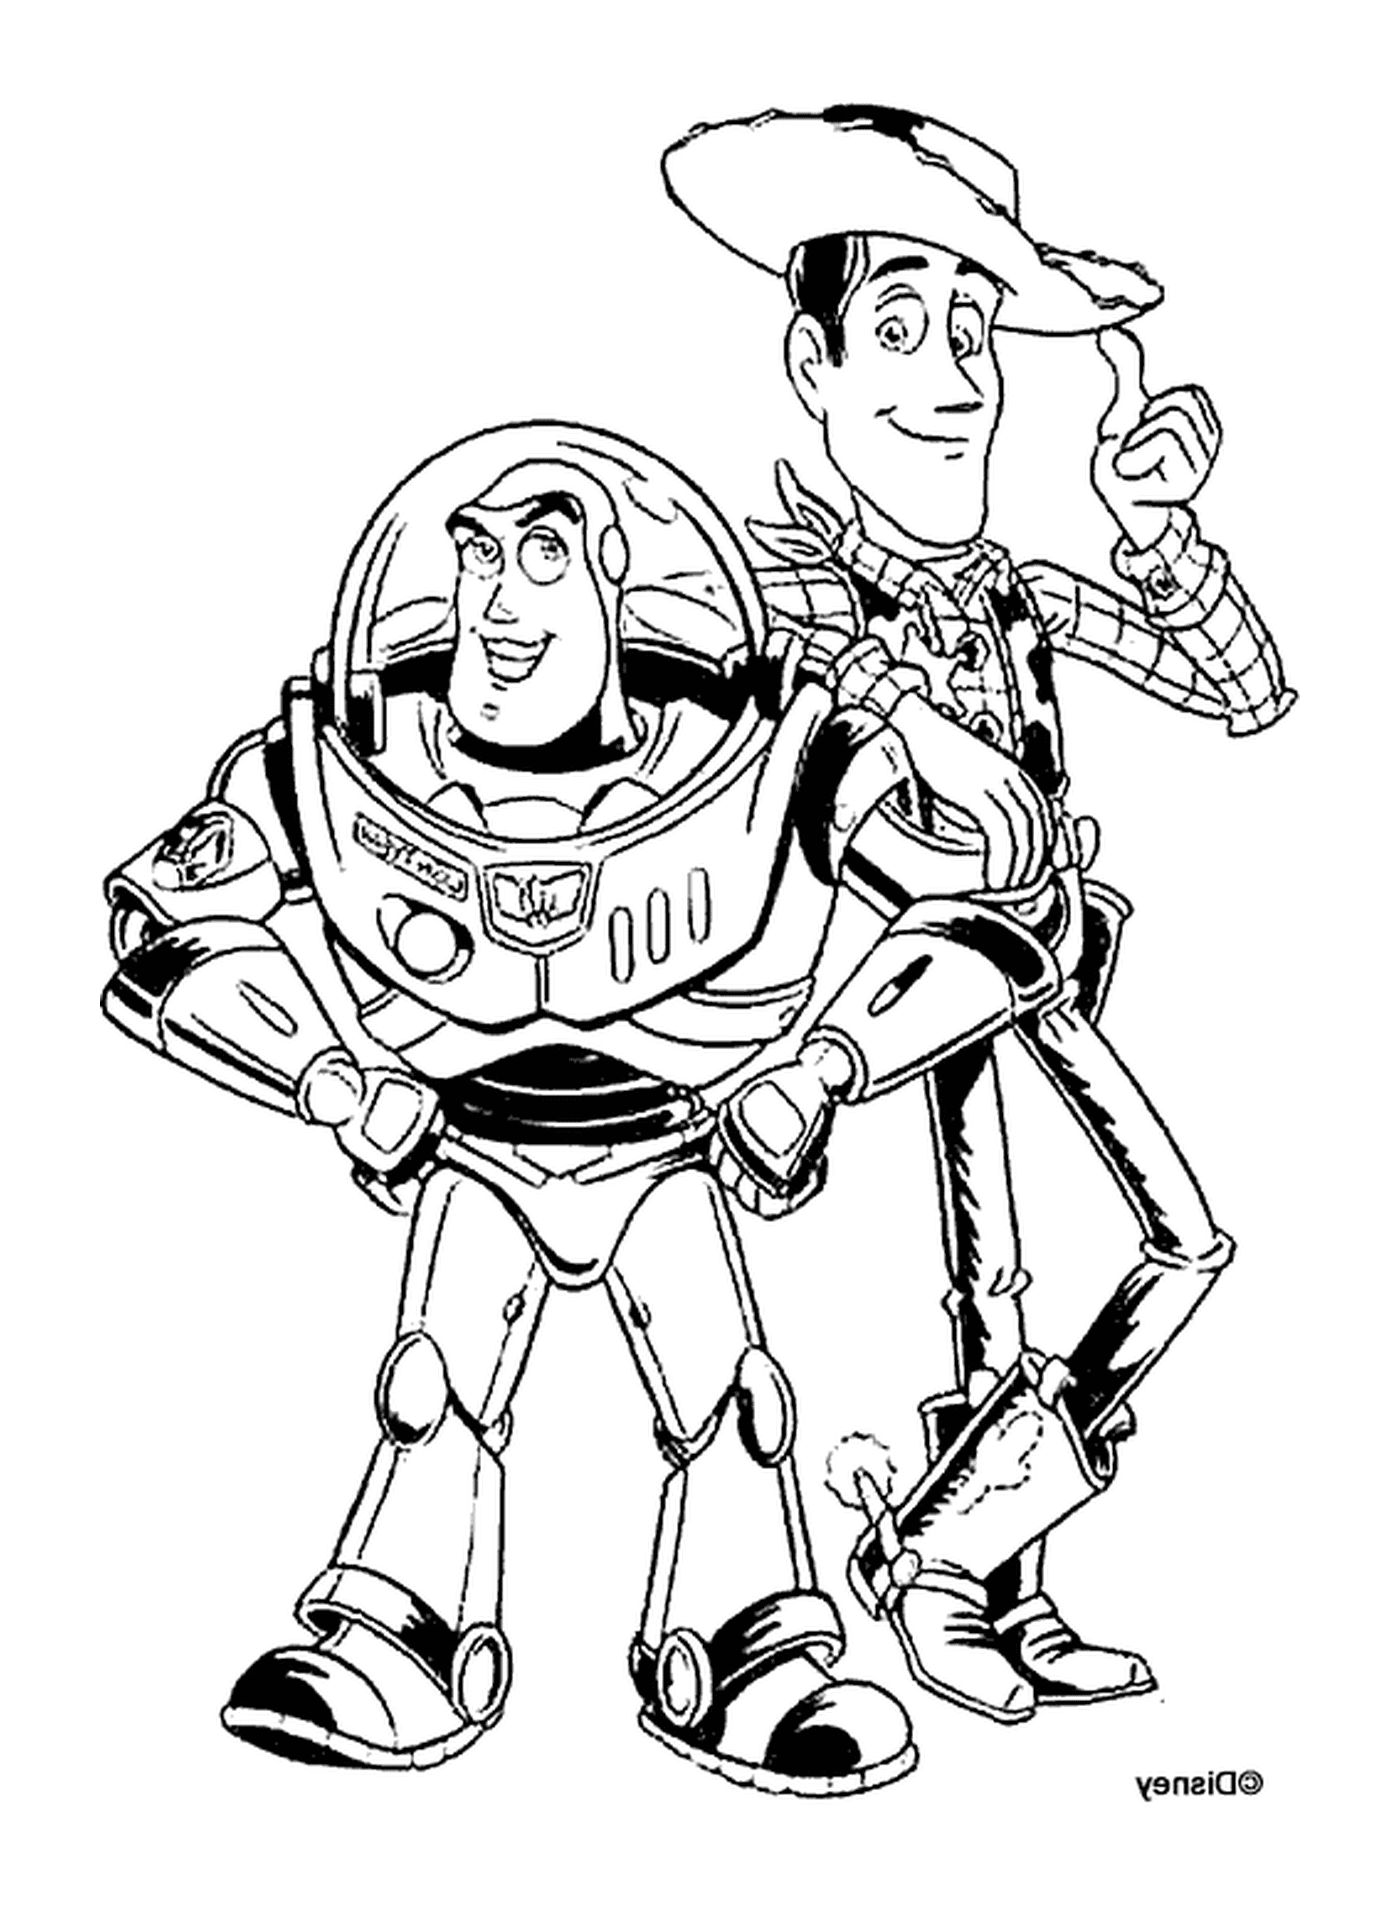  Buzz the Light and Woody, legendary duo 